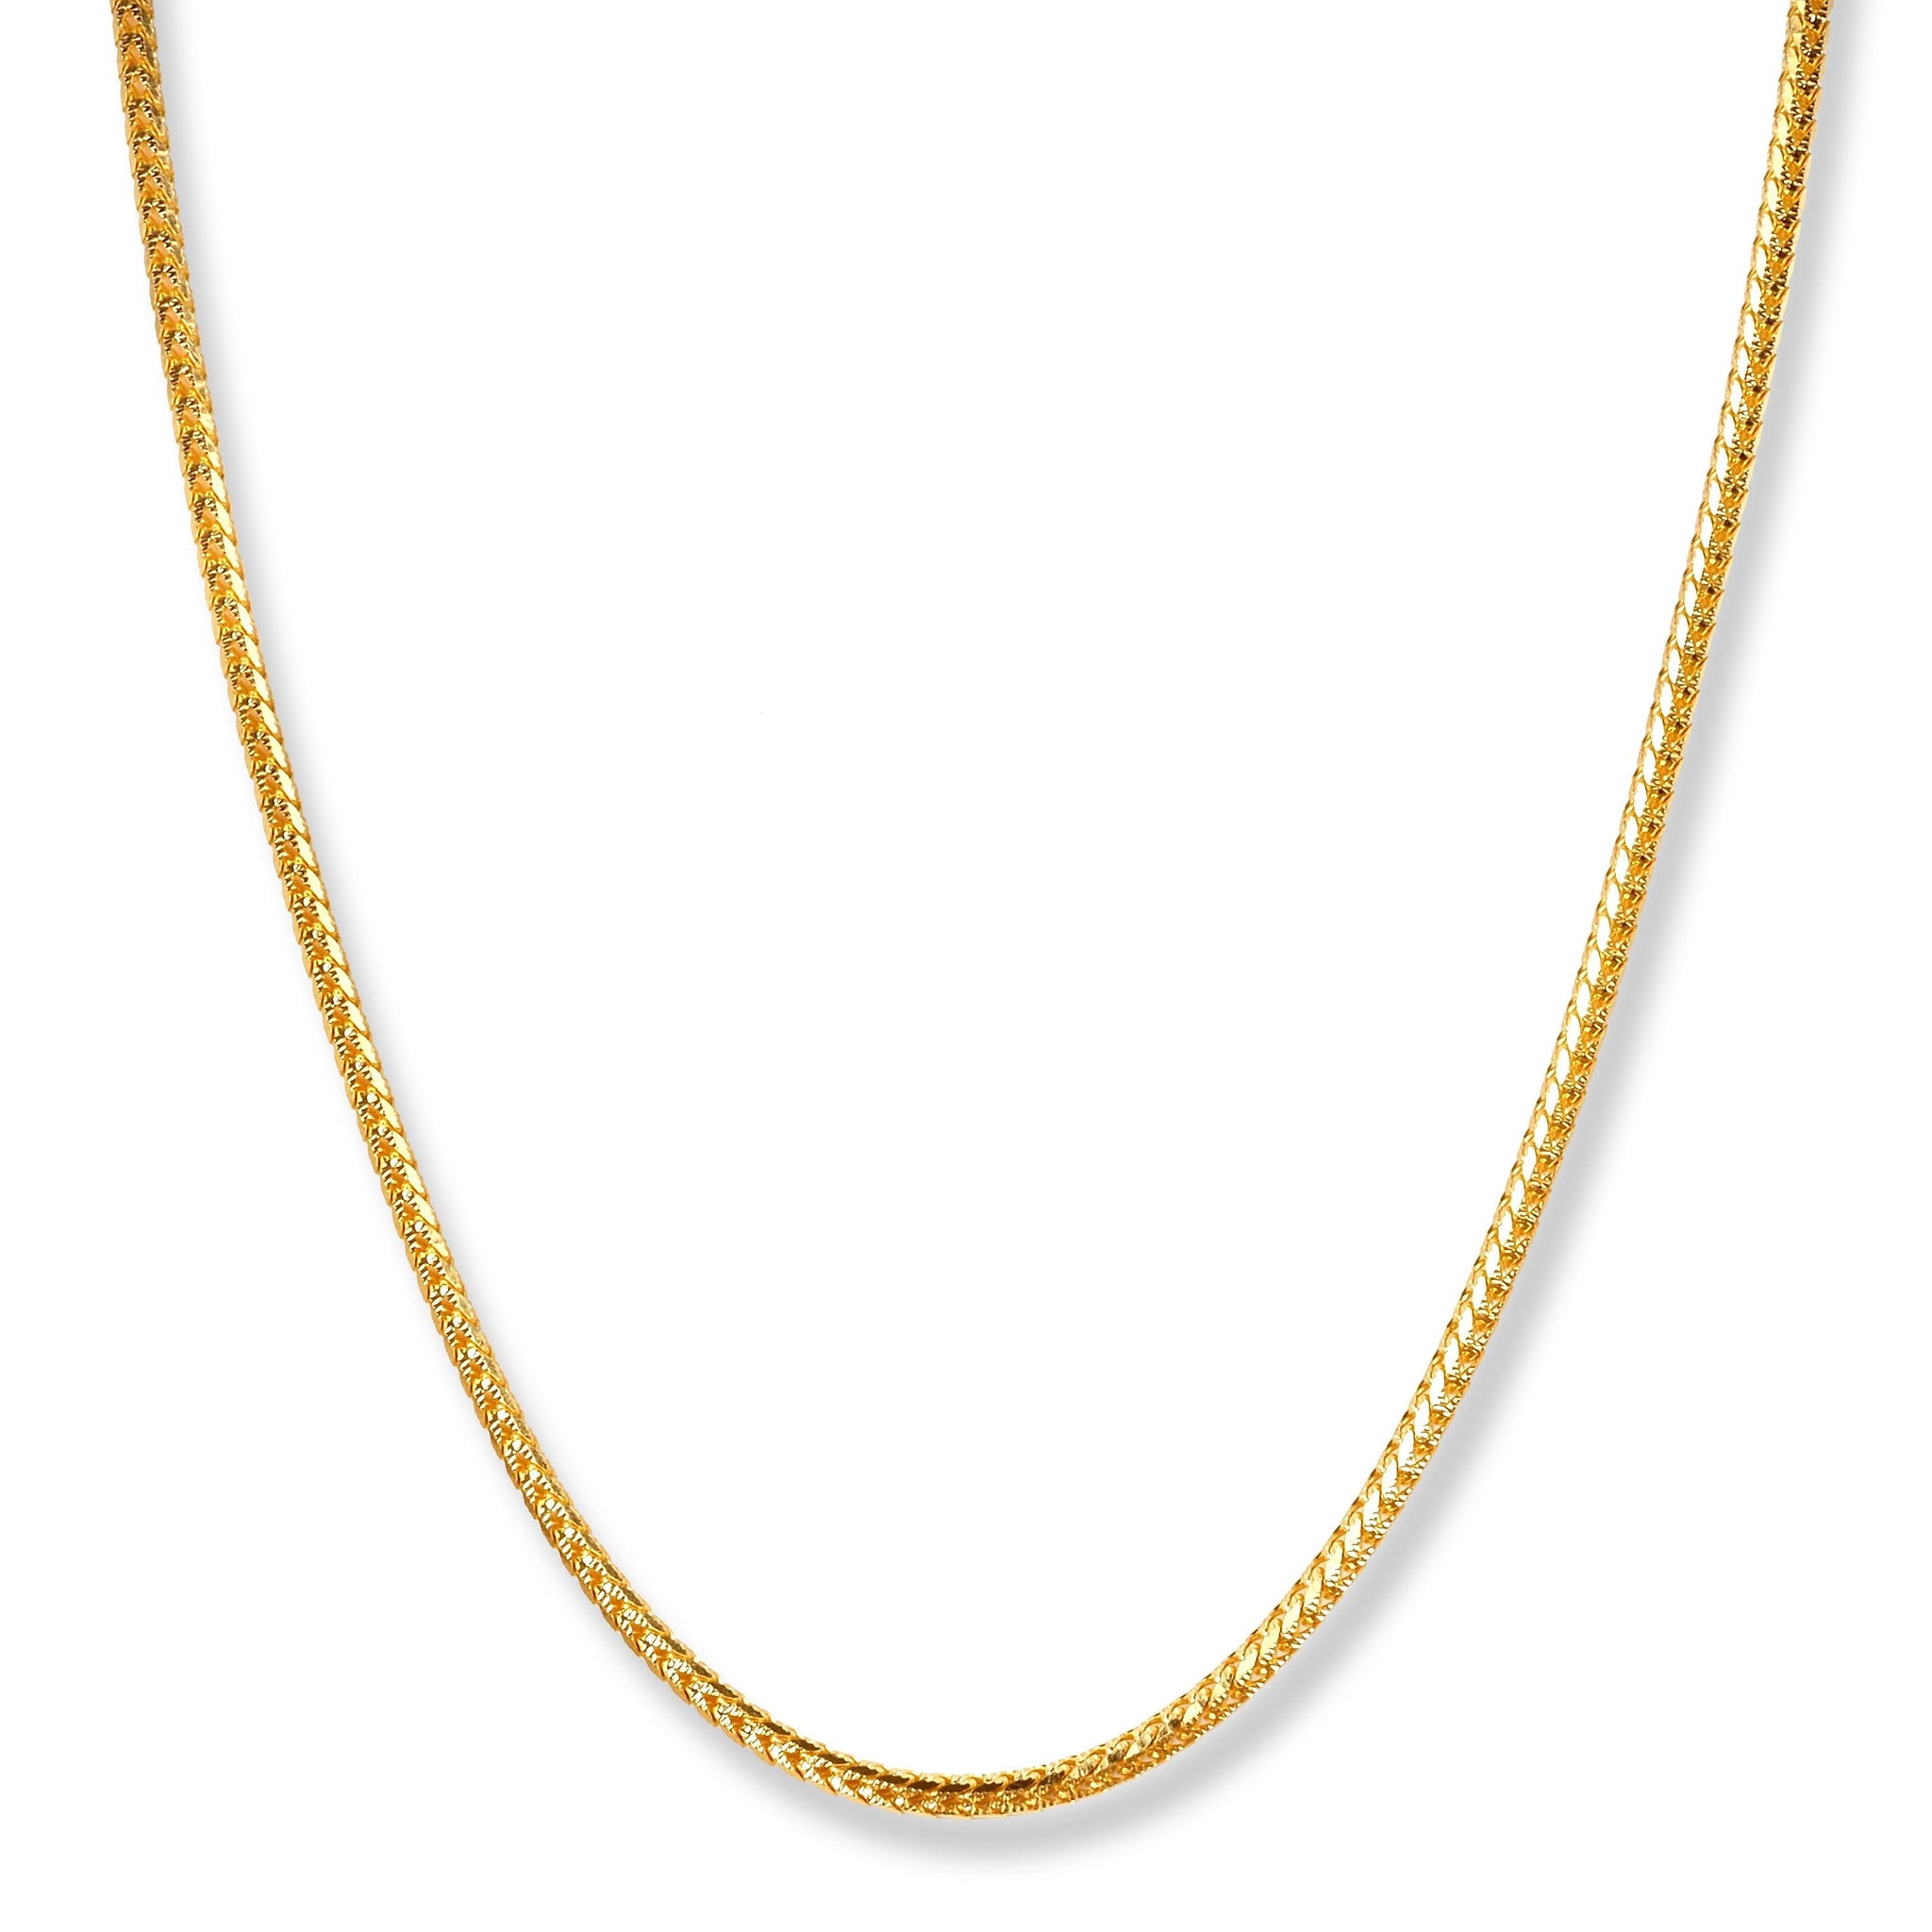 22ct Yellow Gold Foxtail Chain with Faceted Sides C-7137